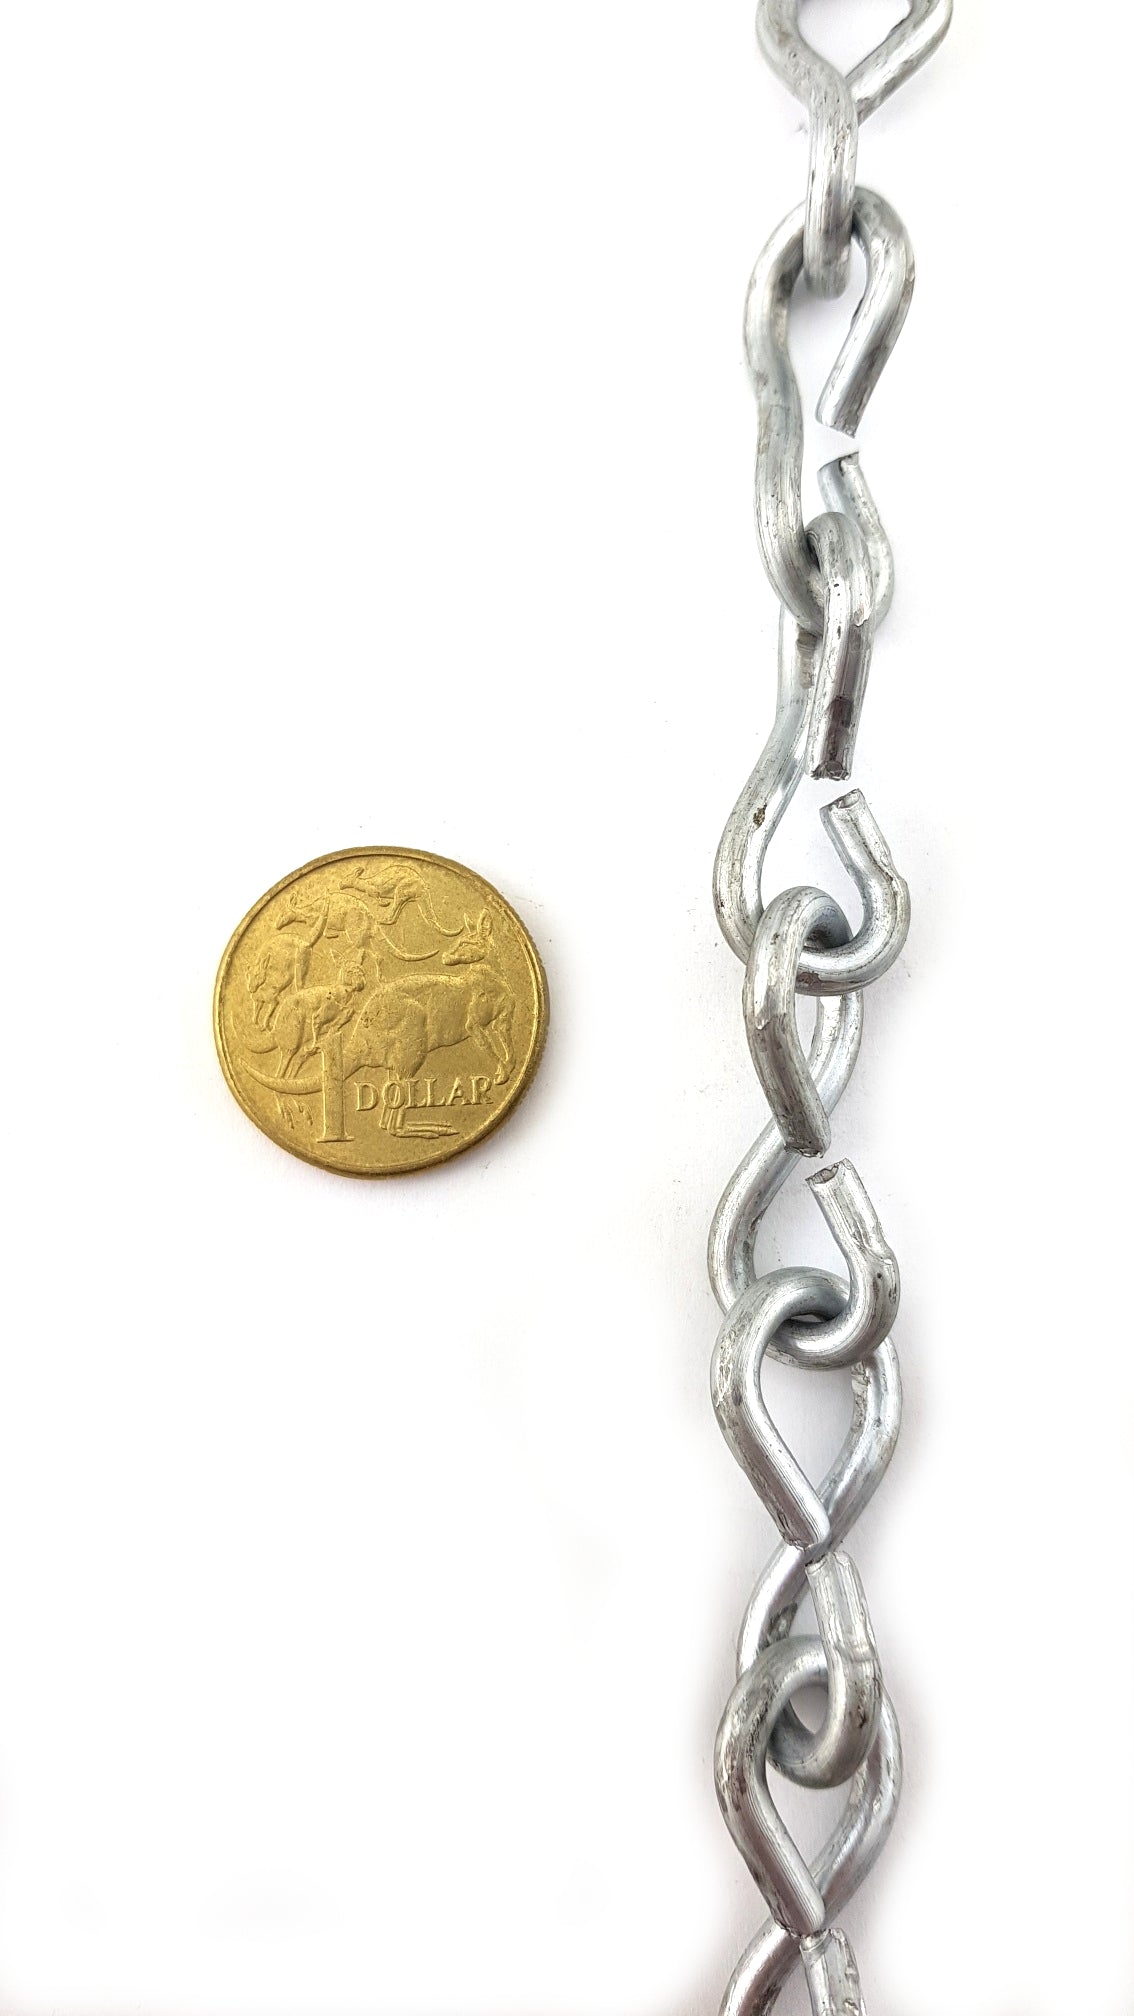 Single Jack Chain in galvanised finish, size 3.15mm, order chain by the metre. Australian made.